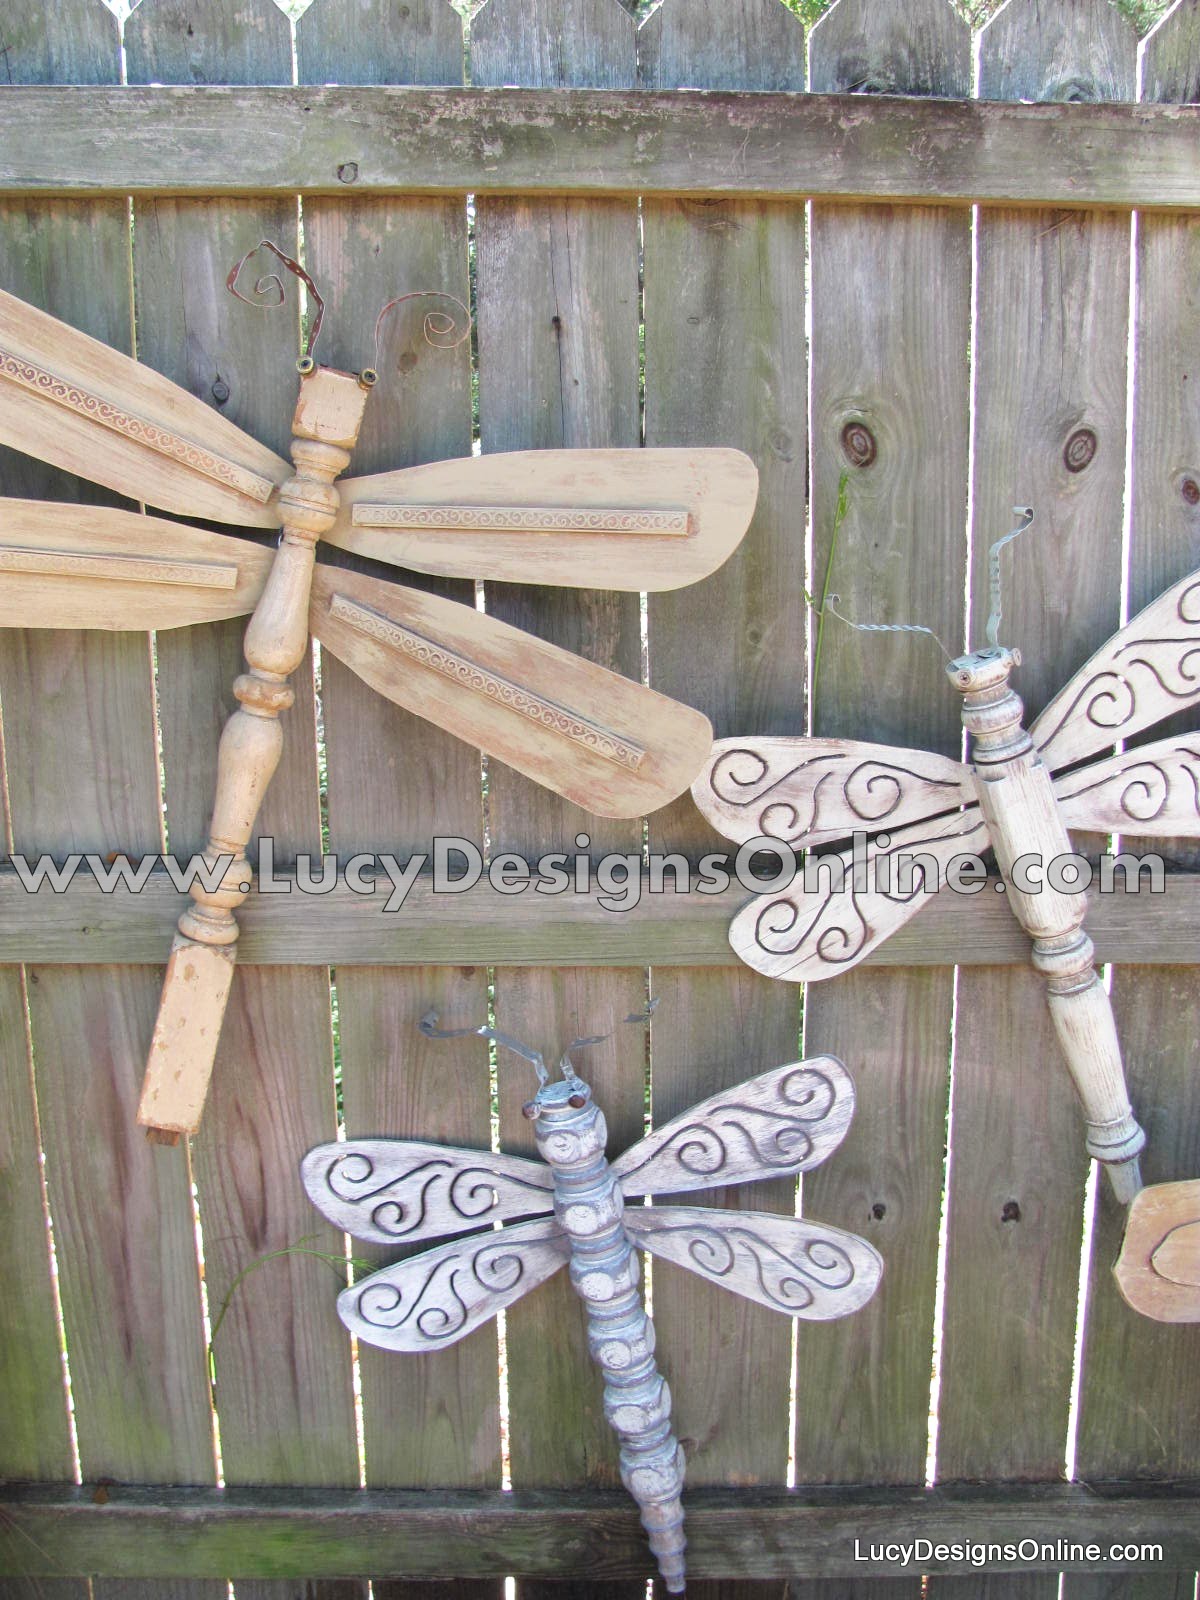 Lucy Designs The Original Table Leg Dragonflies With Ceiling Fan